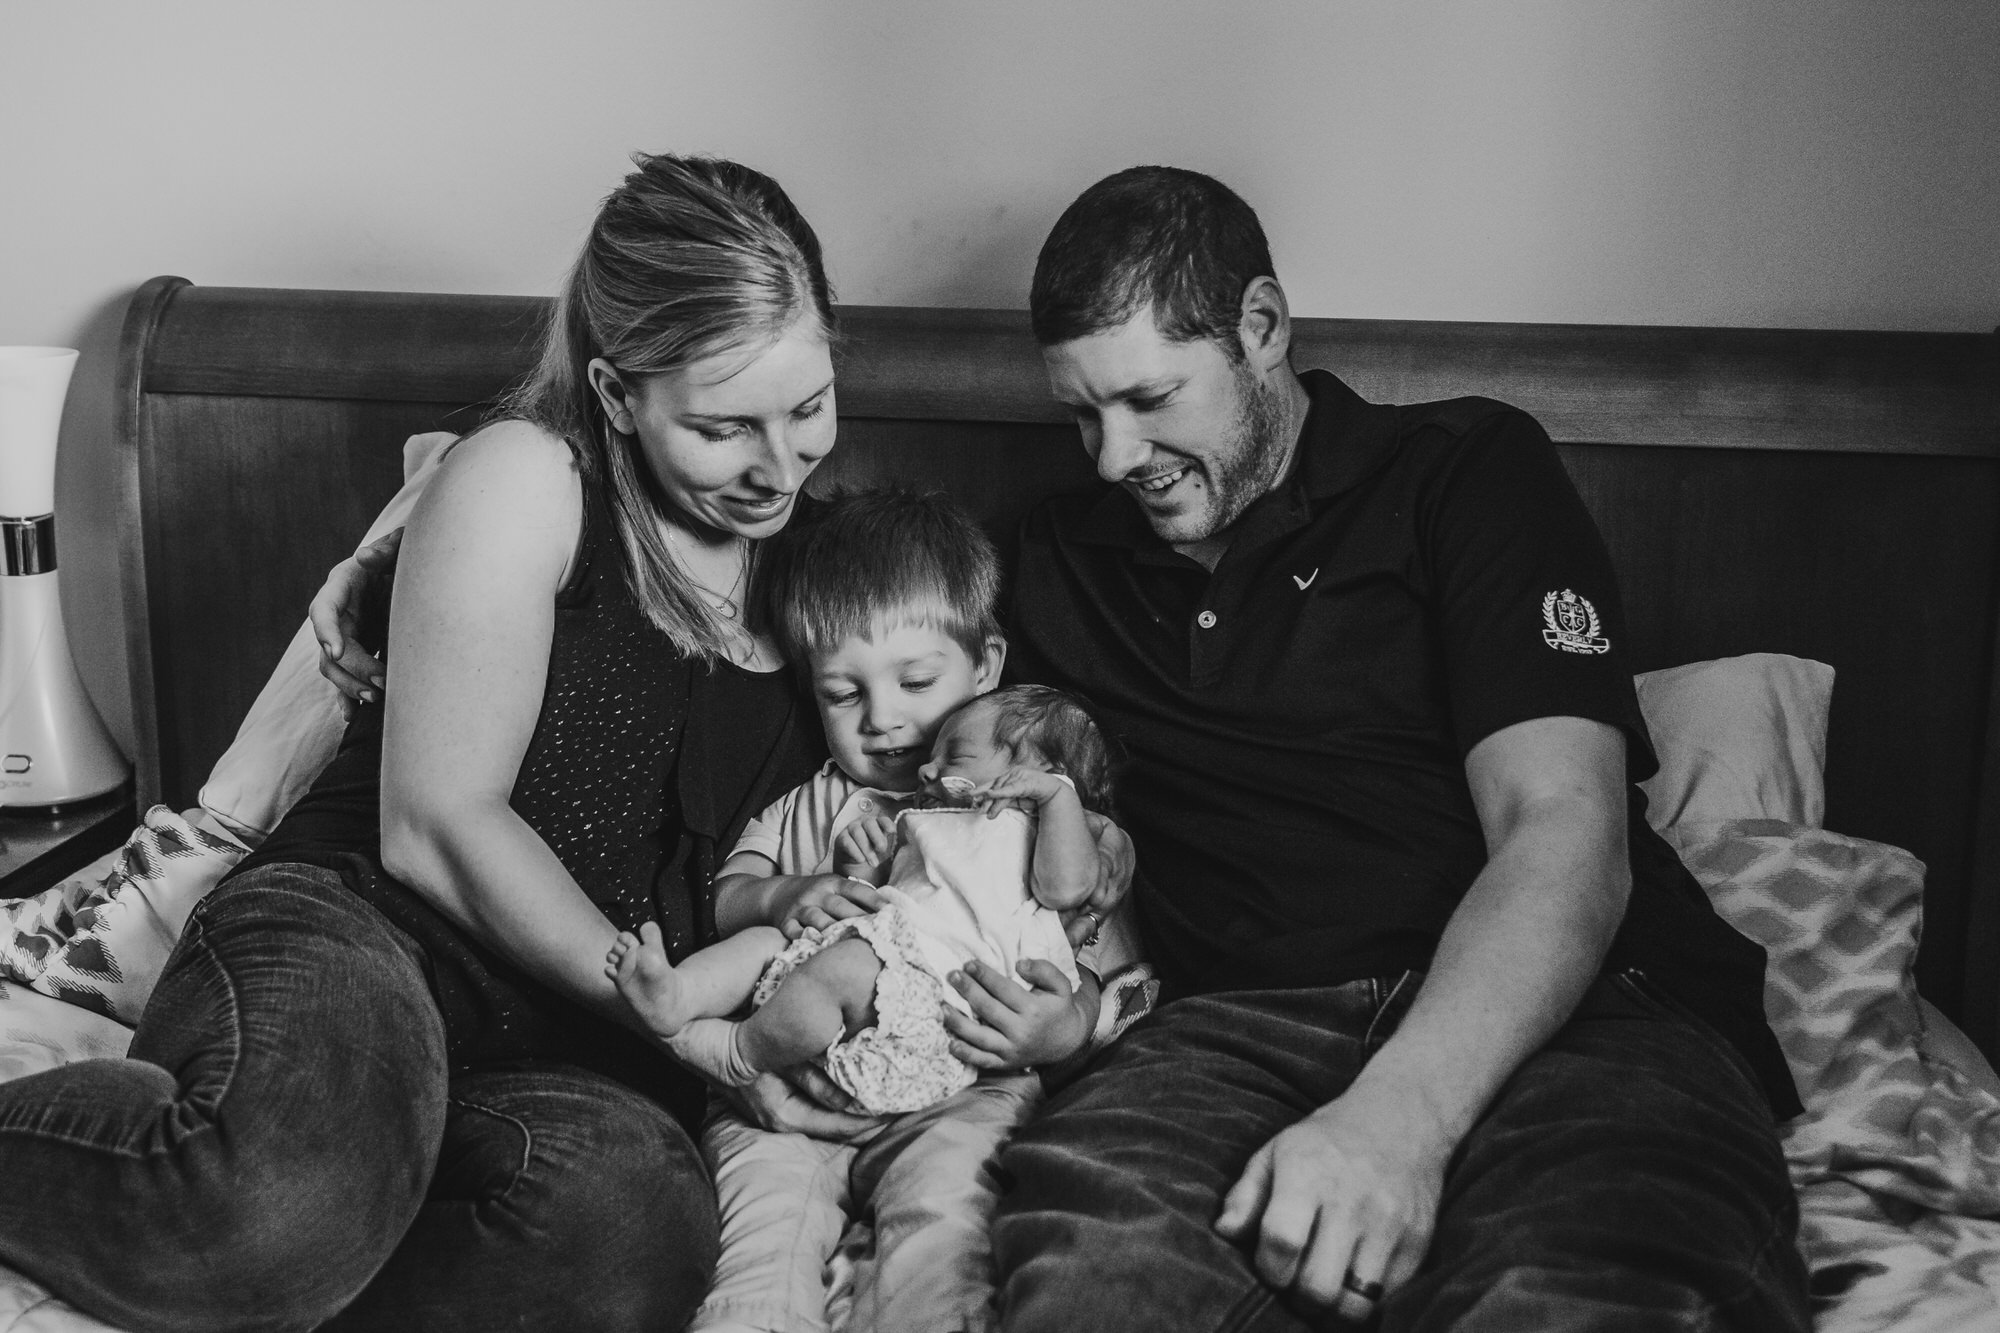 Dundas Newborn Photographer - family in the bed holding baby together